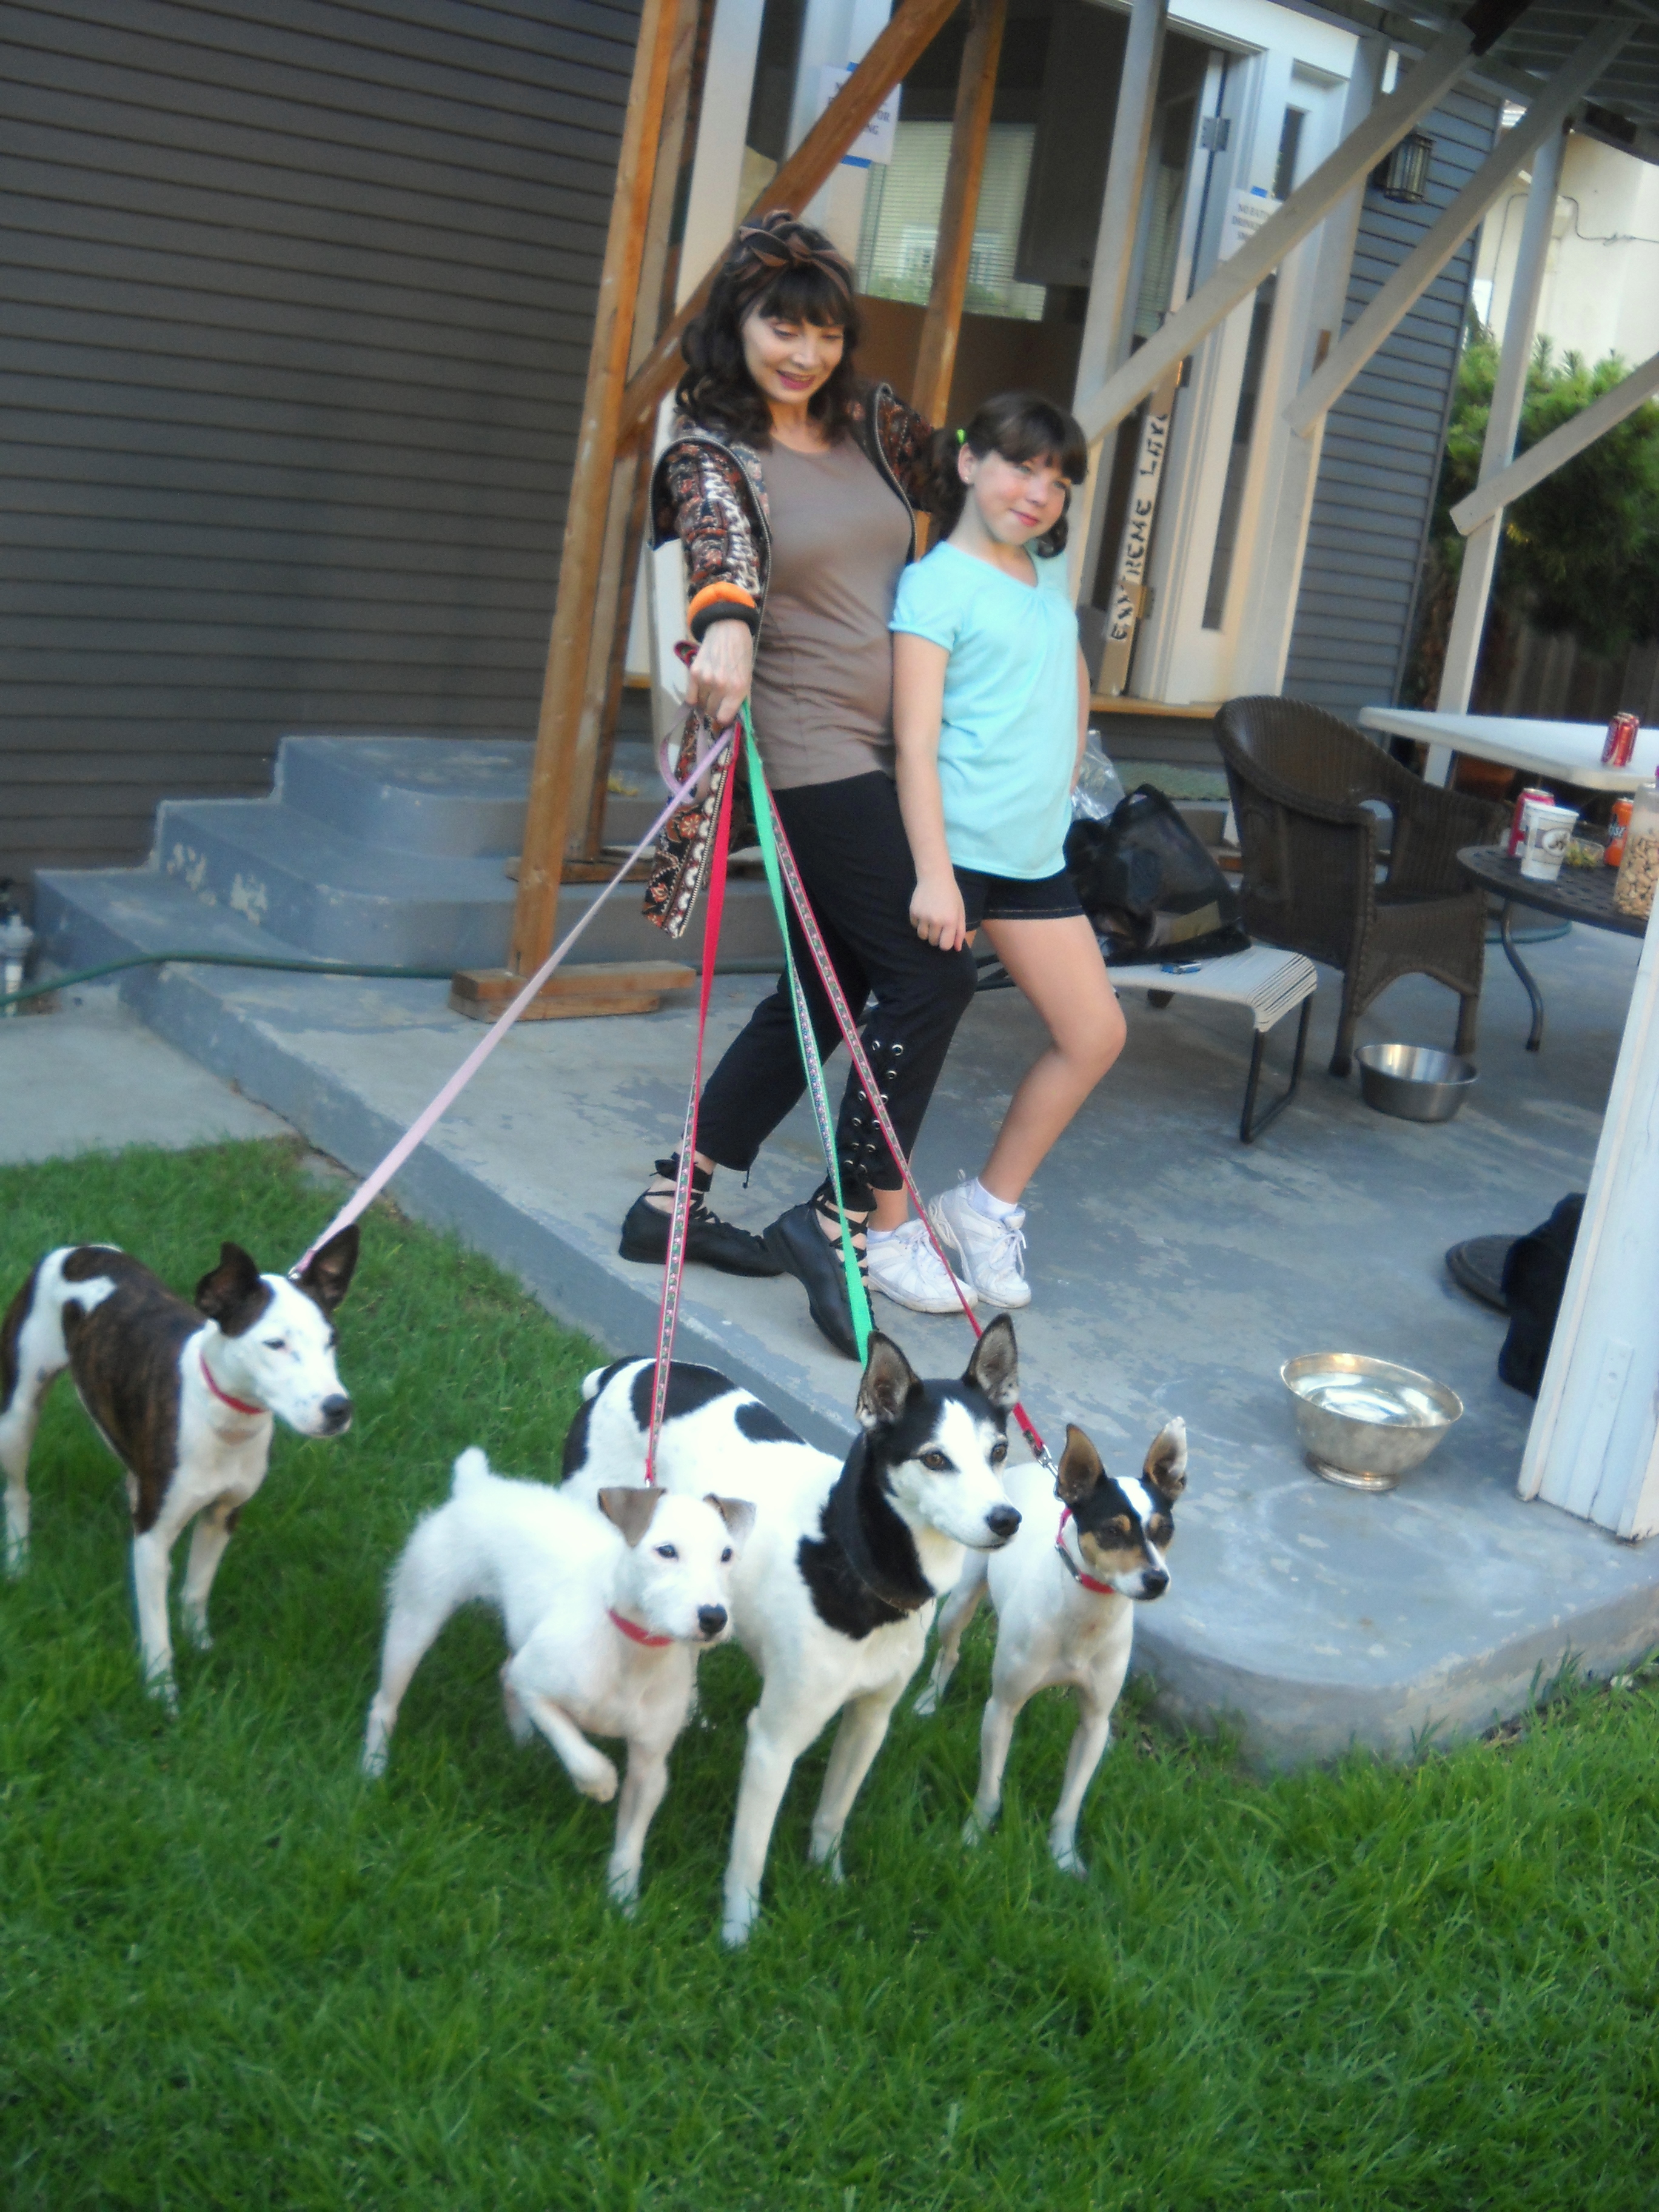 Toni Basil, Alyssa and the trained doggies that were to be a part of the DISH NETWORK commercial